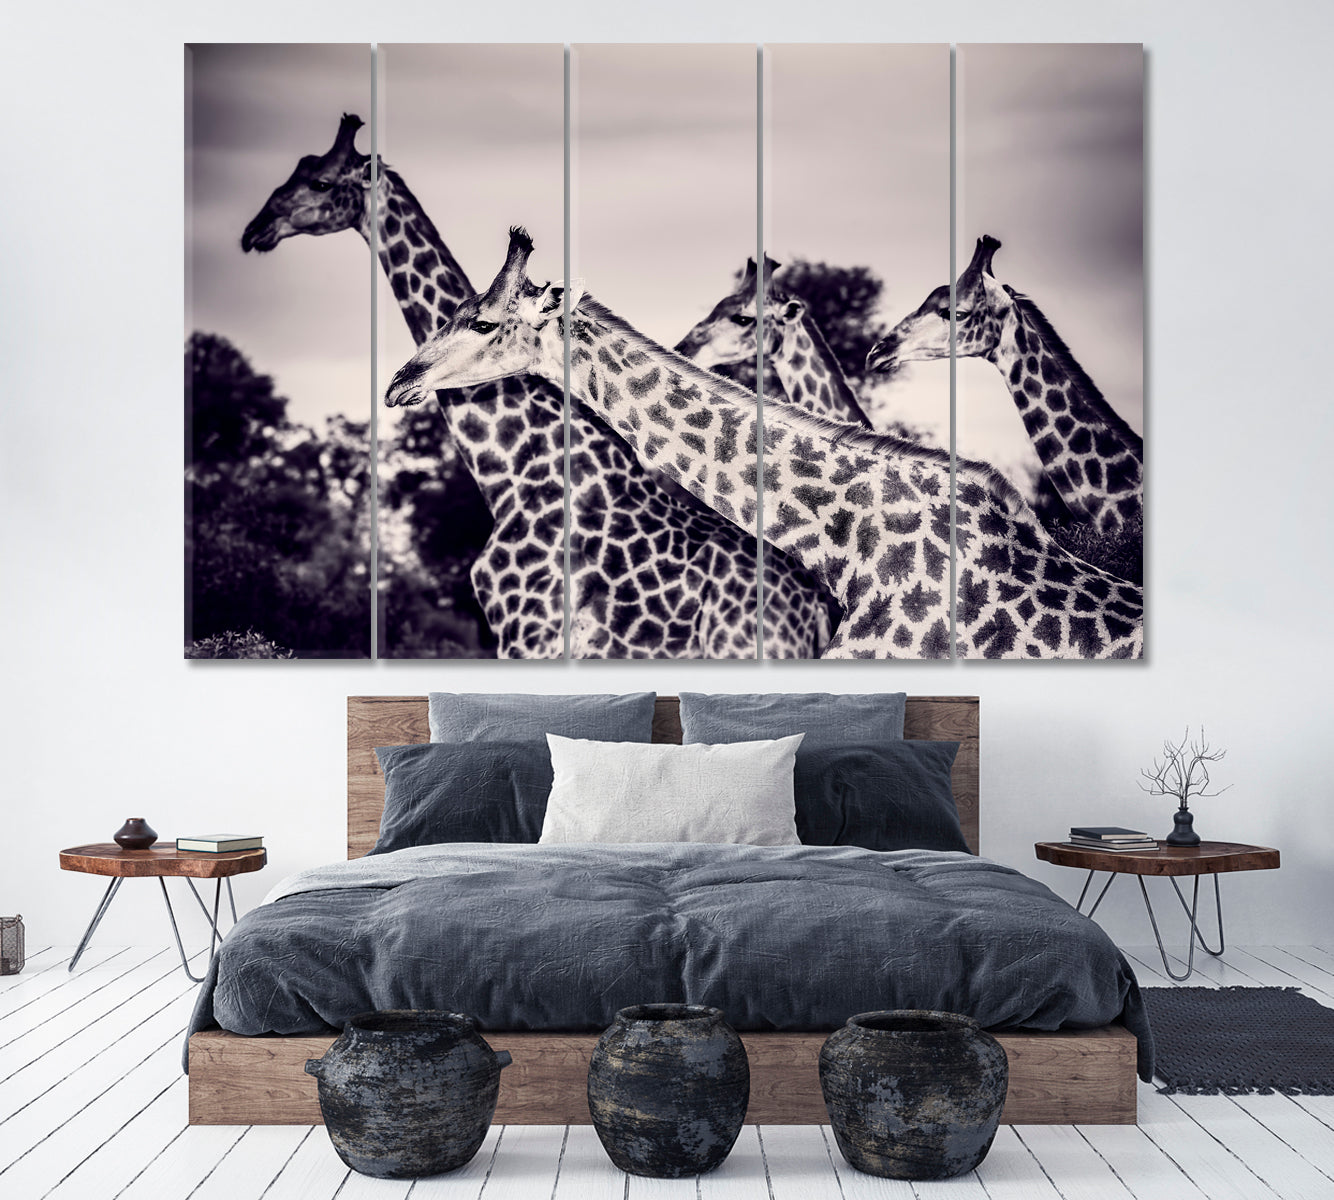 Giraffes in Black and White Canvas Print ArtLexy 5 Panels 36"x24" inches 